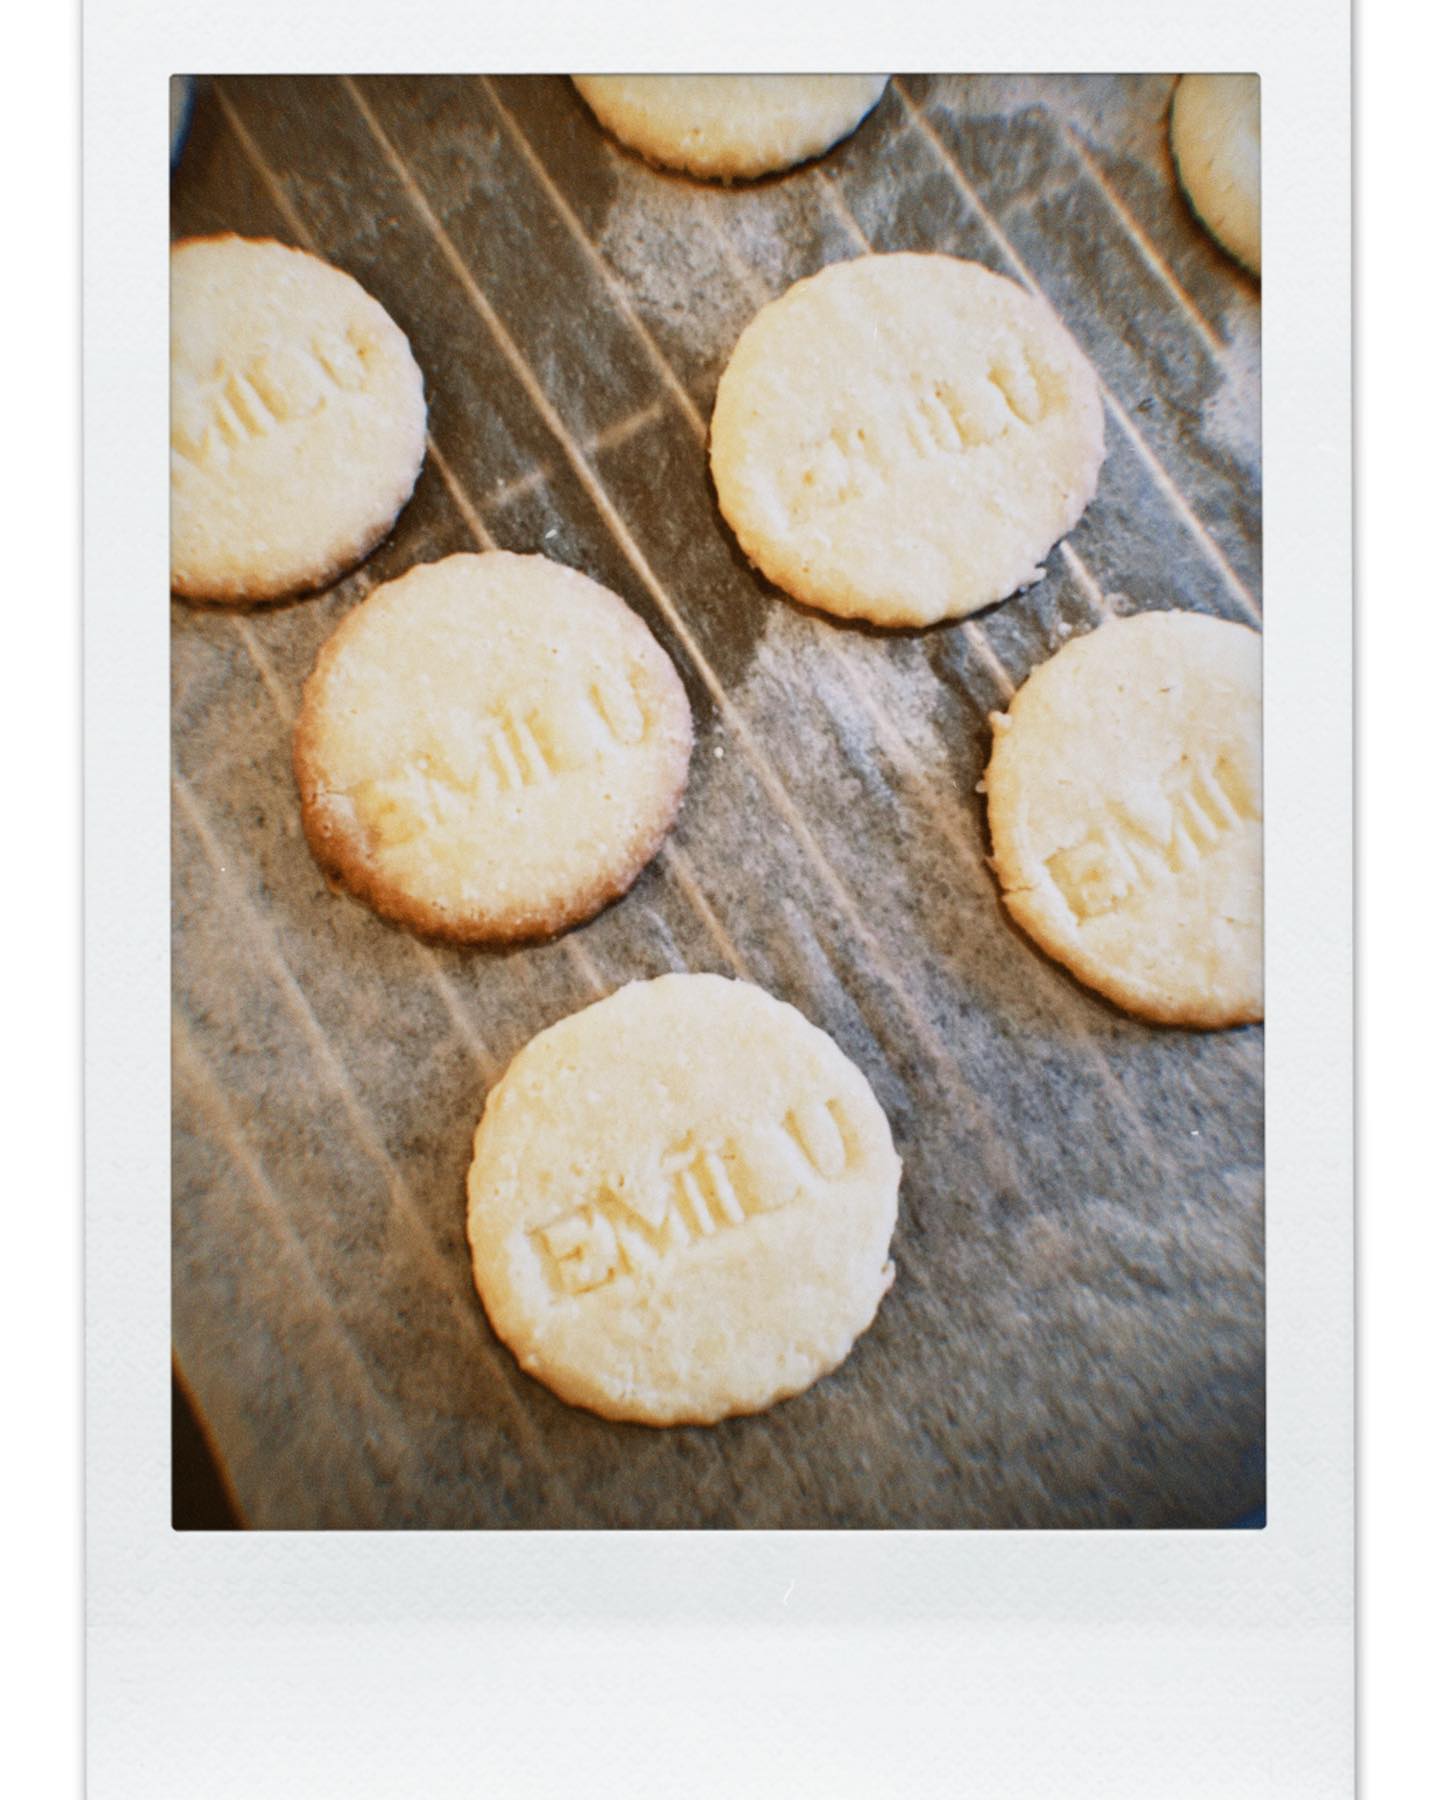 OUR EMILU COOKIES ARE READY TO…